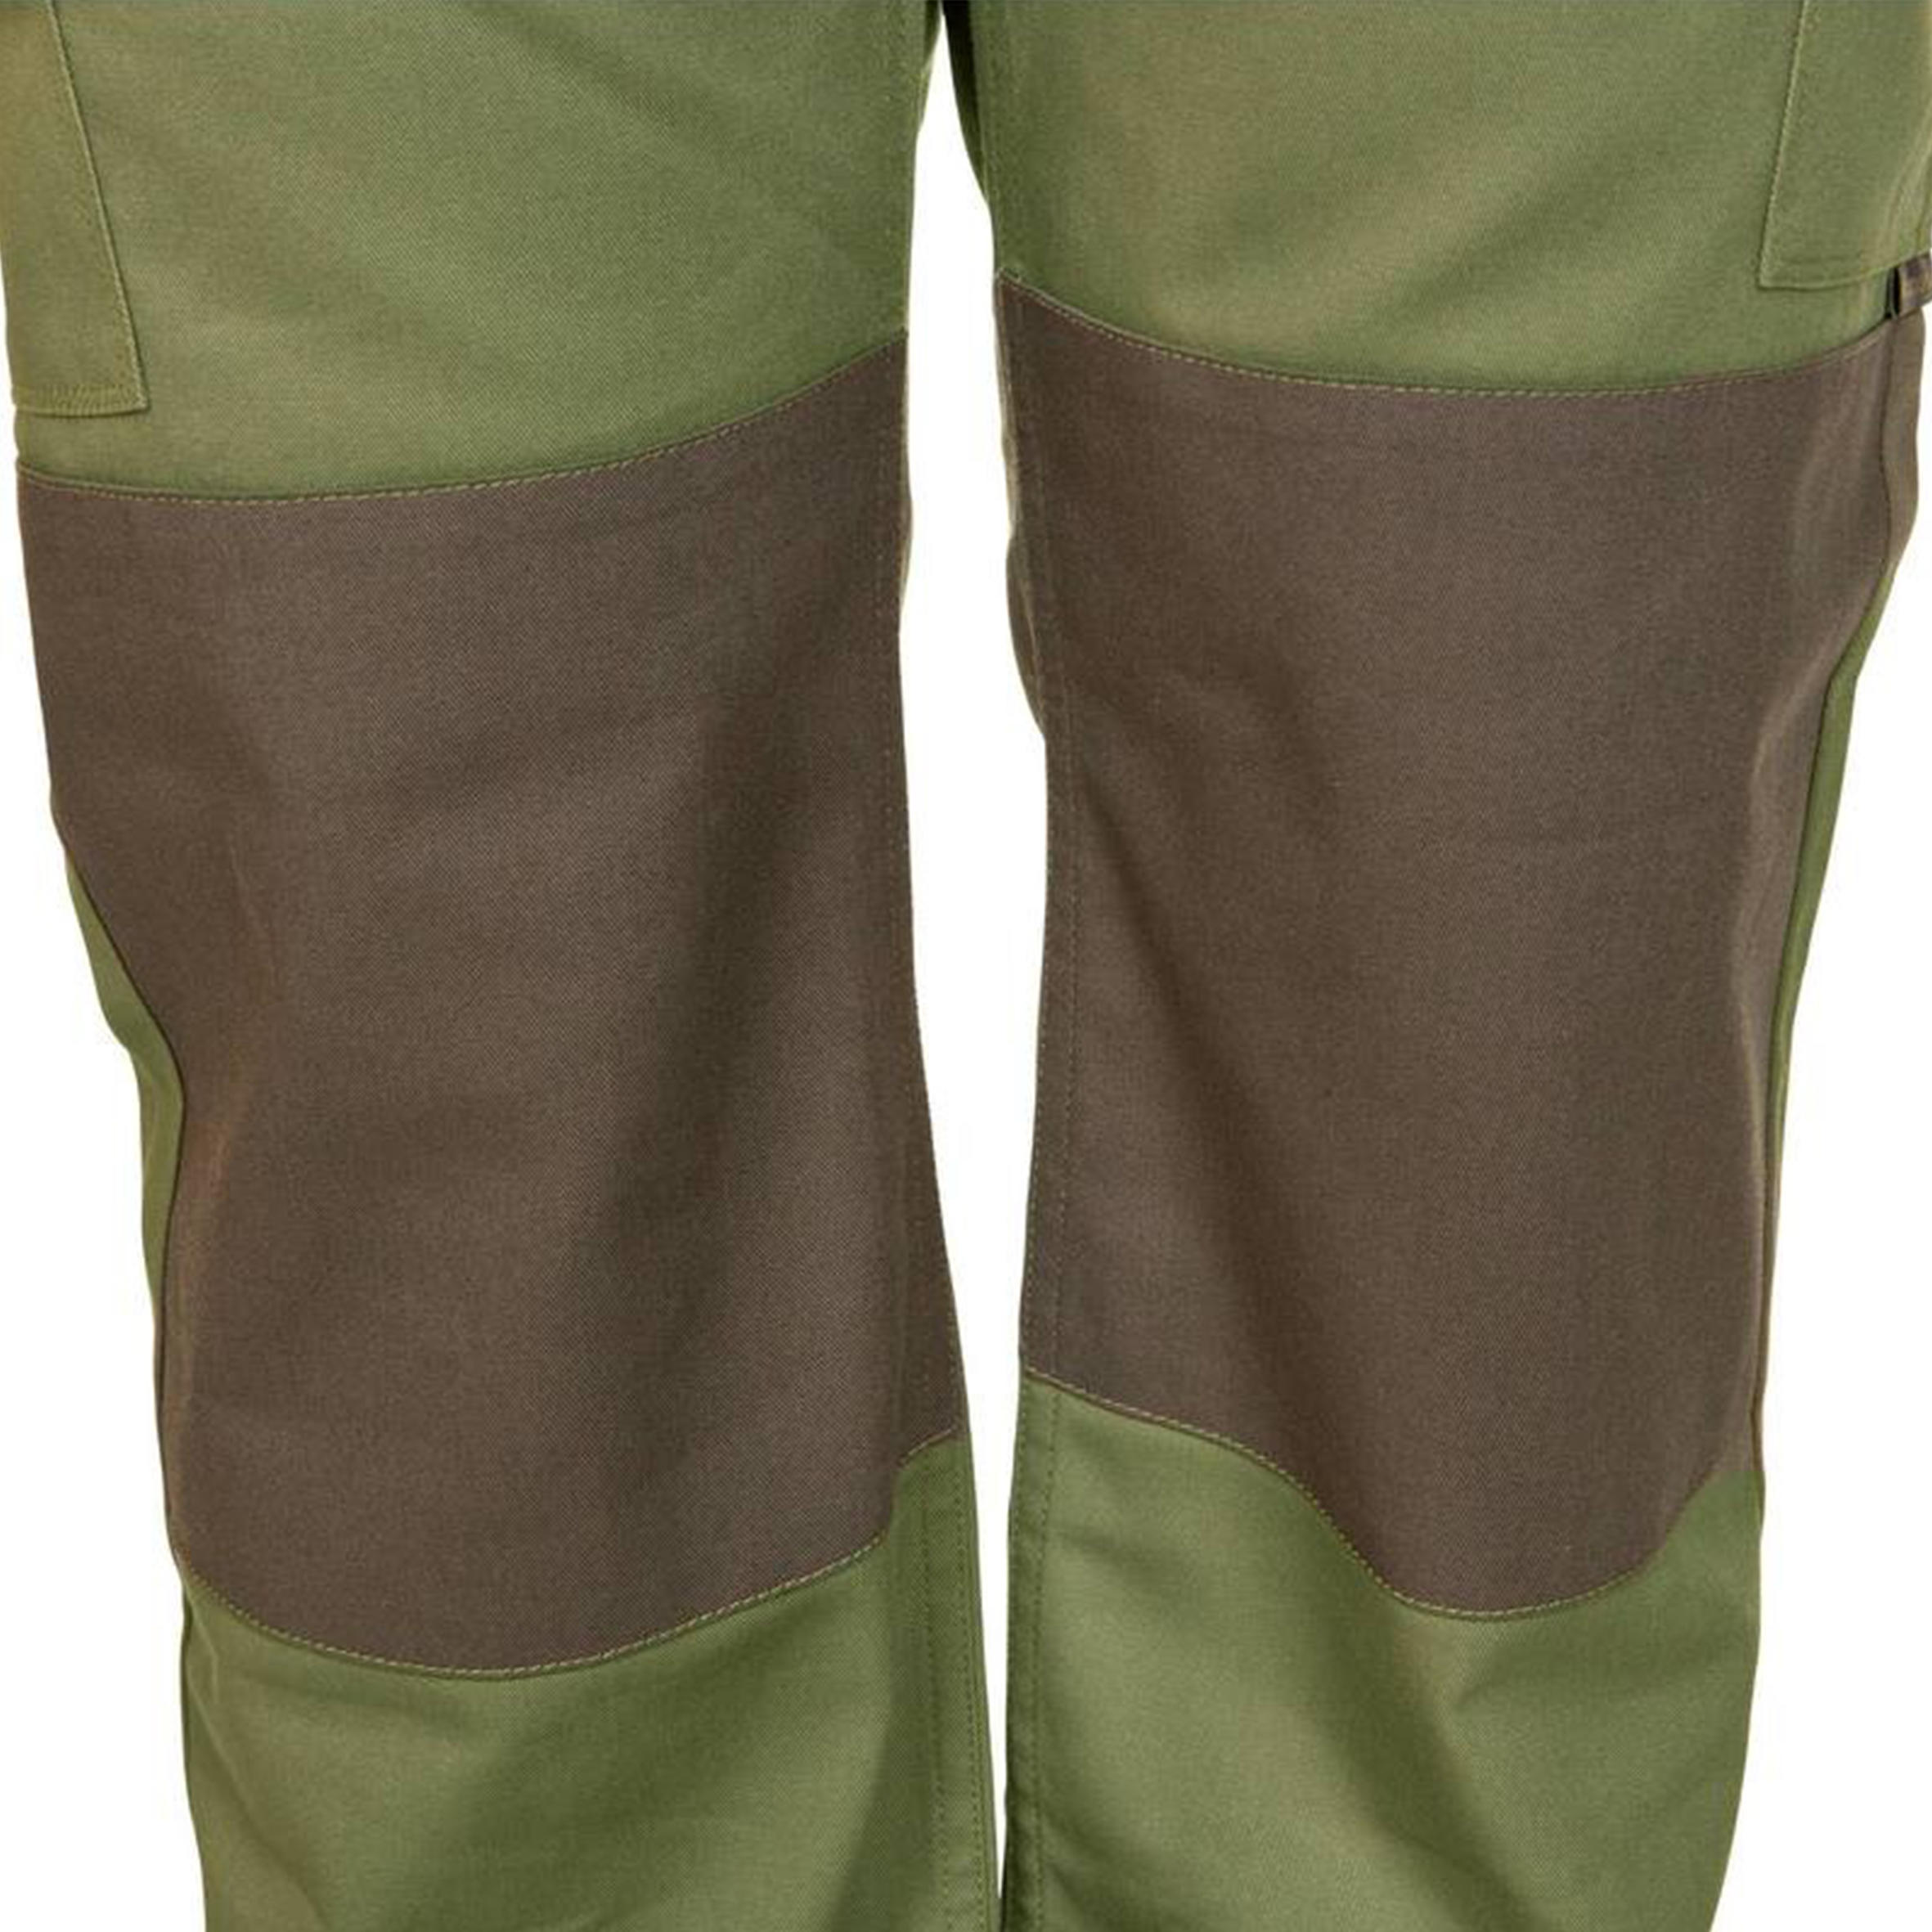 SOLOGNAC Steppe 300 Trouser Camo Desert  Buy SOLOGNAC Steppe 300 Trouser  Camo Desert Online at Best Prices in India on Snapdeal